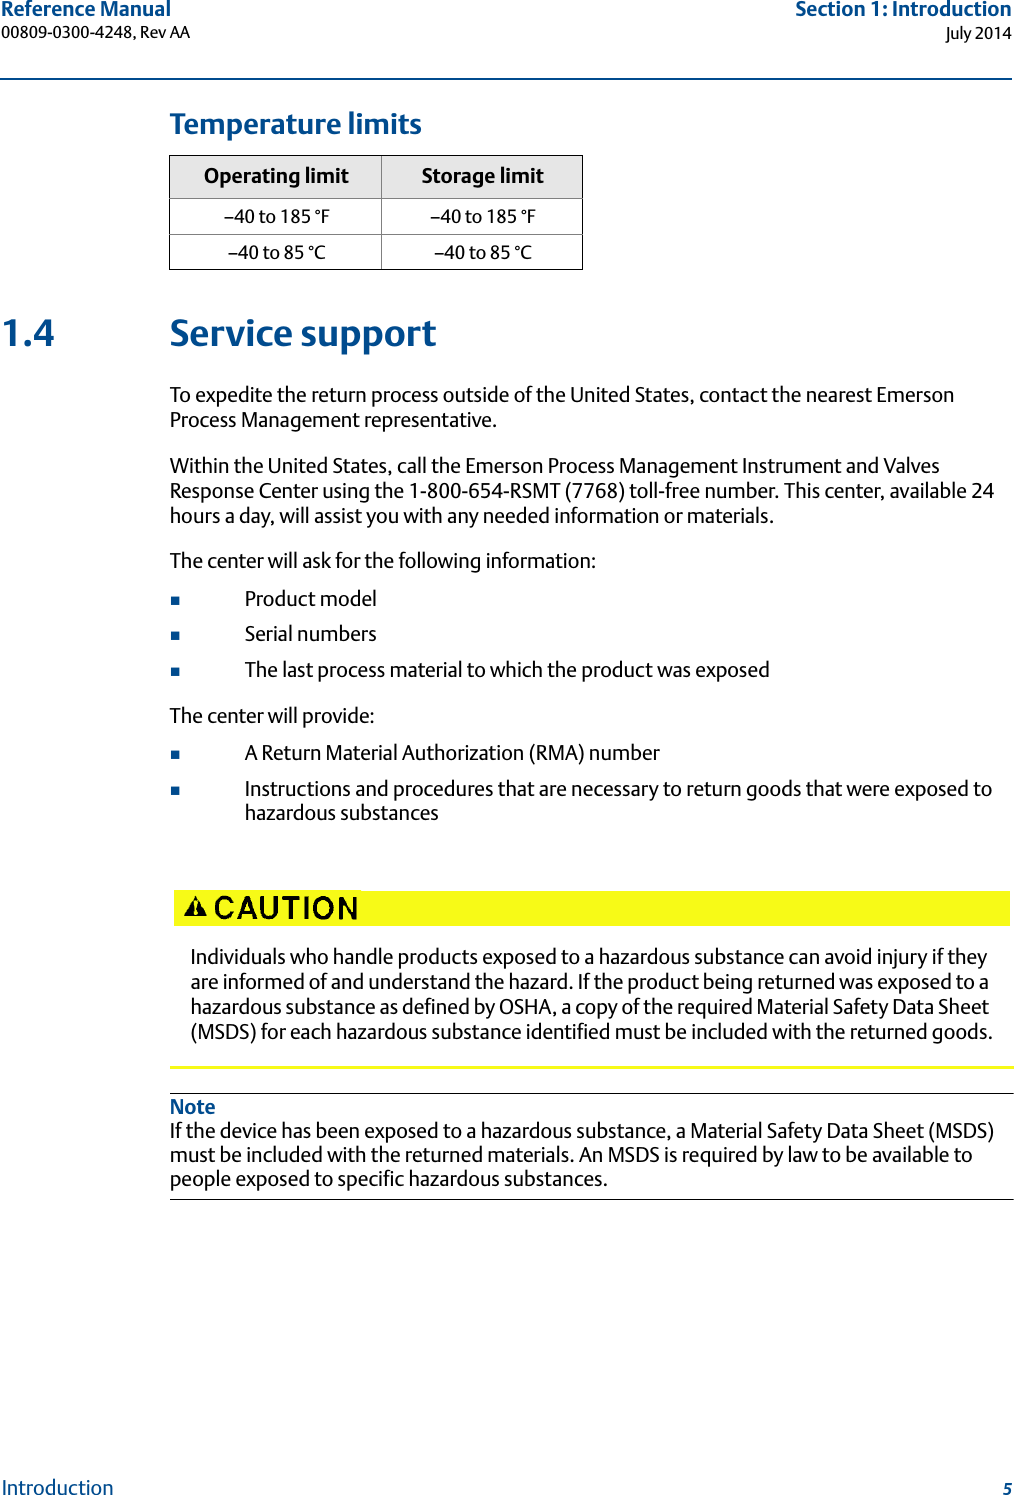 5Reference Manual 00809-0300-4248, Rev AASection 1: IntroductionJuly 2014IntroductionTemperature limits1.4 Service supportTo expedite the return process outside of the United States, contact the nearest Emerson Process Management representative.Within the United States, call the Emerson Process Management Instrument and Valves Response Center using the 1-800-654-RSMT (7768) toll-free number. This center, available 24 hours a day, will assist you with any needed information or materials.The center will ask for the following information:Product model Serial numbersThe last process material to which the product was exposedThe center will provide:A Return Material Authorization (RMA) numberInstructions and procedures that are necessary to return goods that were exposed to hazardous substancesNoteIf the device has been exposed to a hazardous substance, a Material Safety Data Sheet (MSDS) must be included with the returned materials. An MSDS is required by law to be available to people exposed to specific hazardous substances.Operating limit Storage limit–40 to 185 °F –40 to 185 °F–40 to 85 °C –40 to 85 °CIndividuals who handle products exposed to a hazardous substance can avoid injury if they are informed of and understand the hazard. If the product being returned was exposed to a hazardous substance as defined by OSHA, a copy of the required Material Safety Data Sheet (MSDS) for each hazardous substance identified must be included with the returned goods.